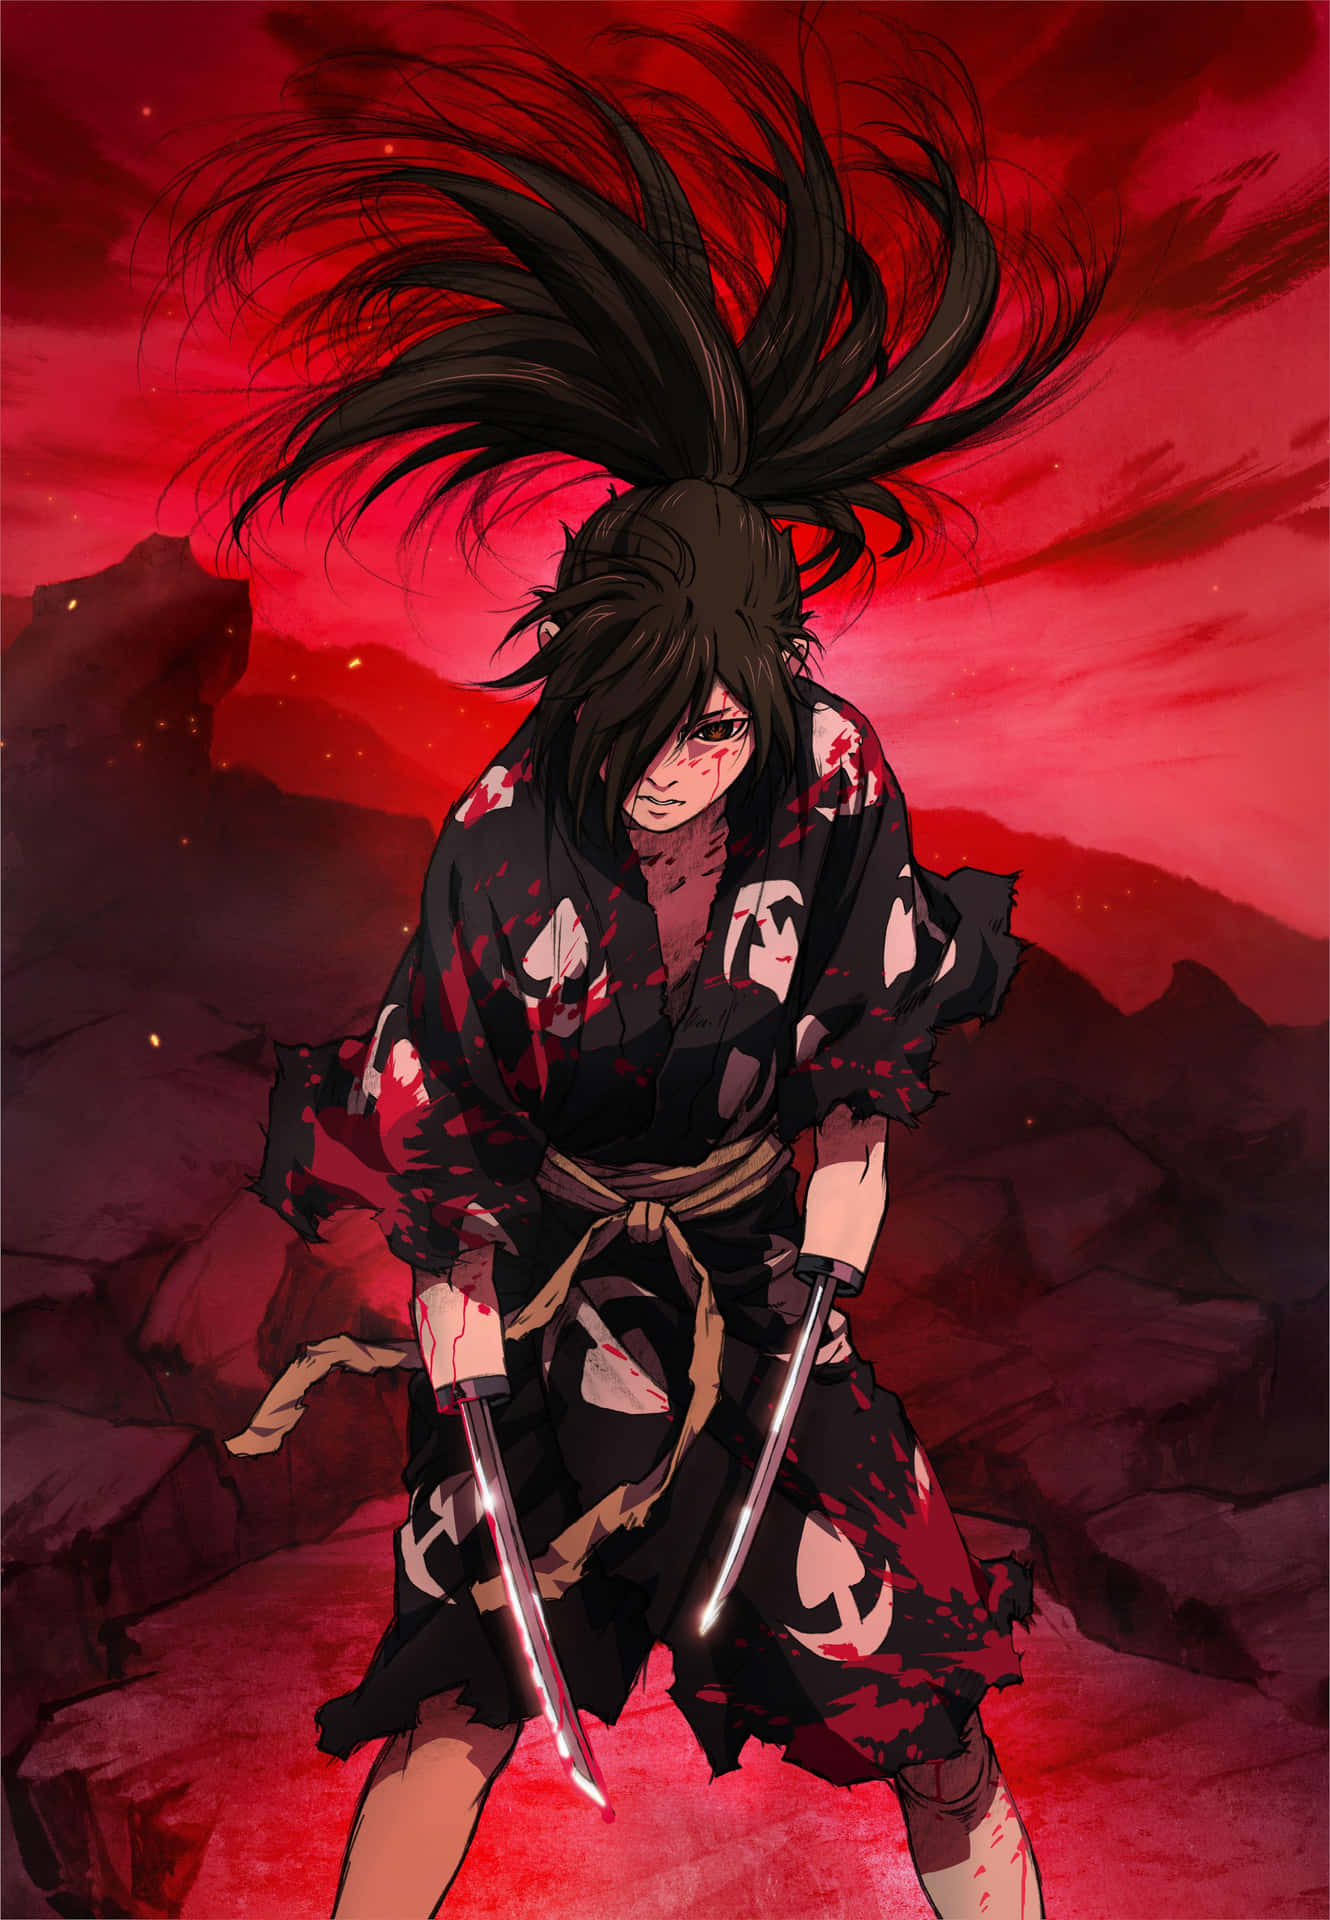 A Fantastic Adventure Through Time and Space - Explore the World of Dororo